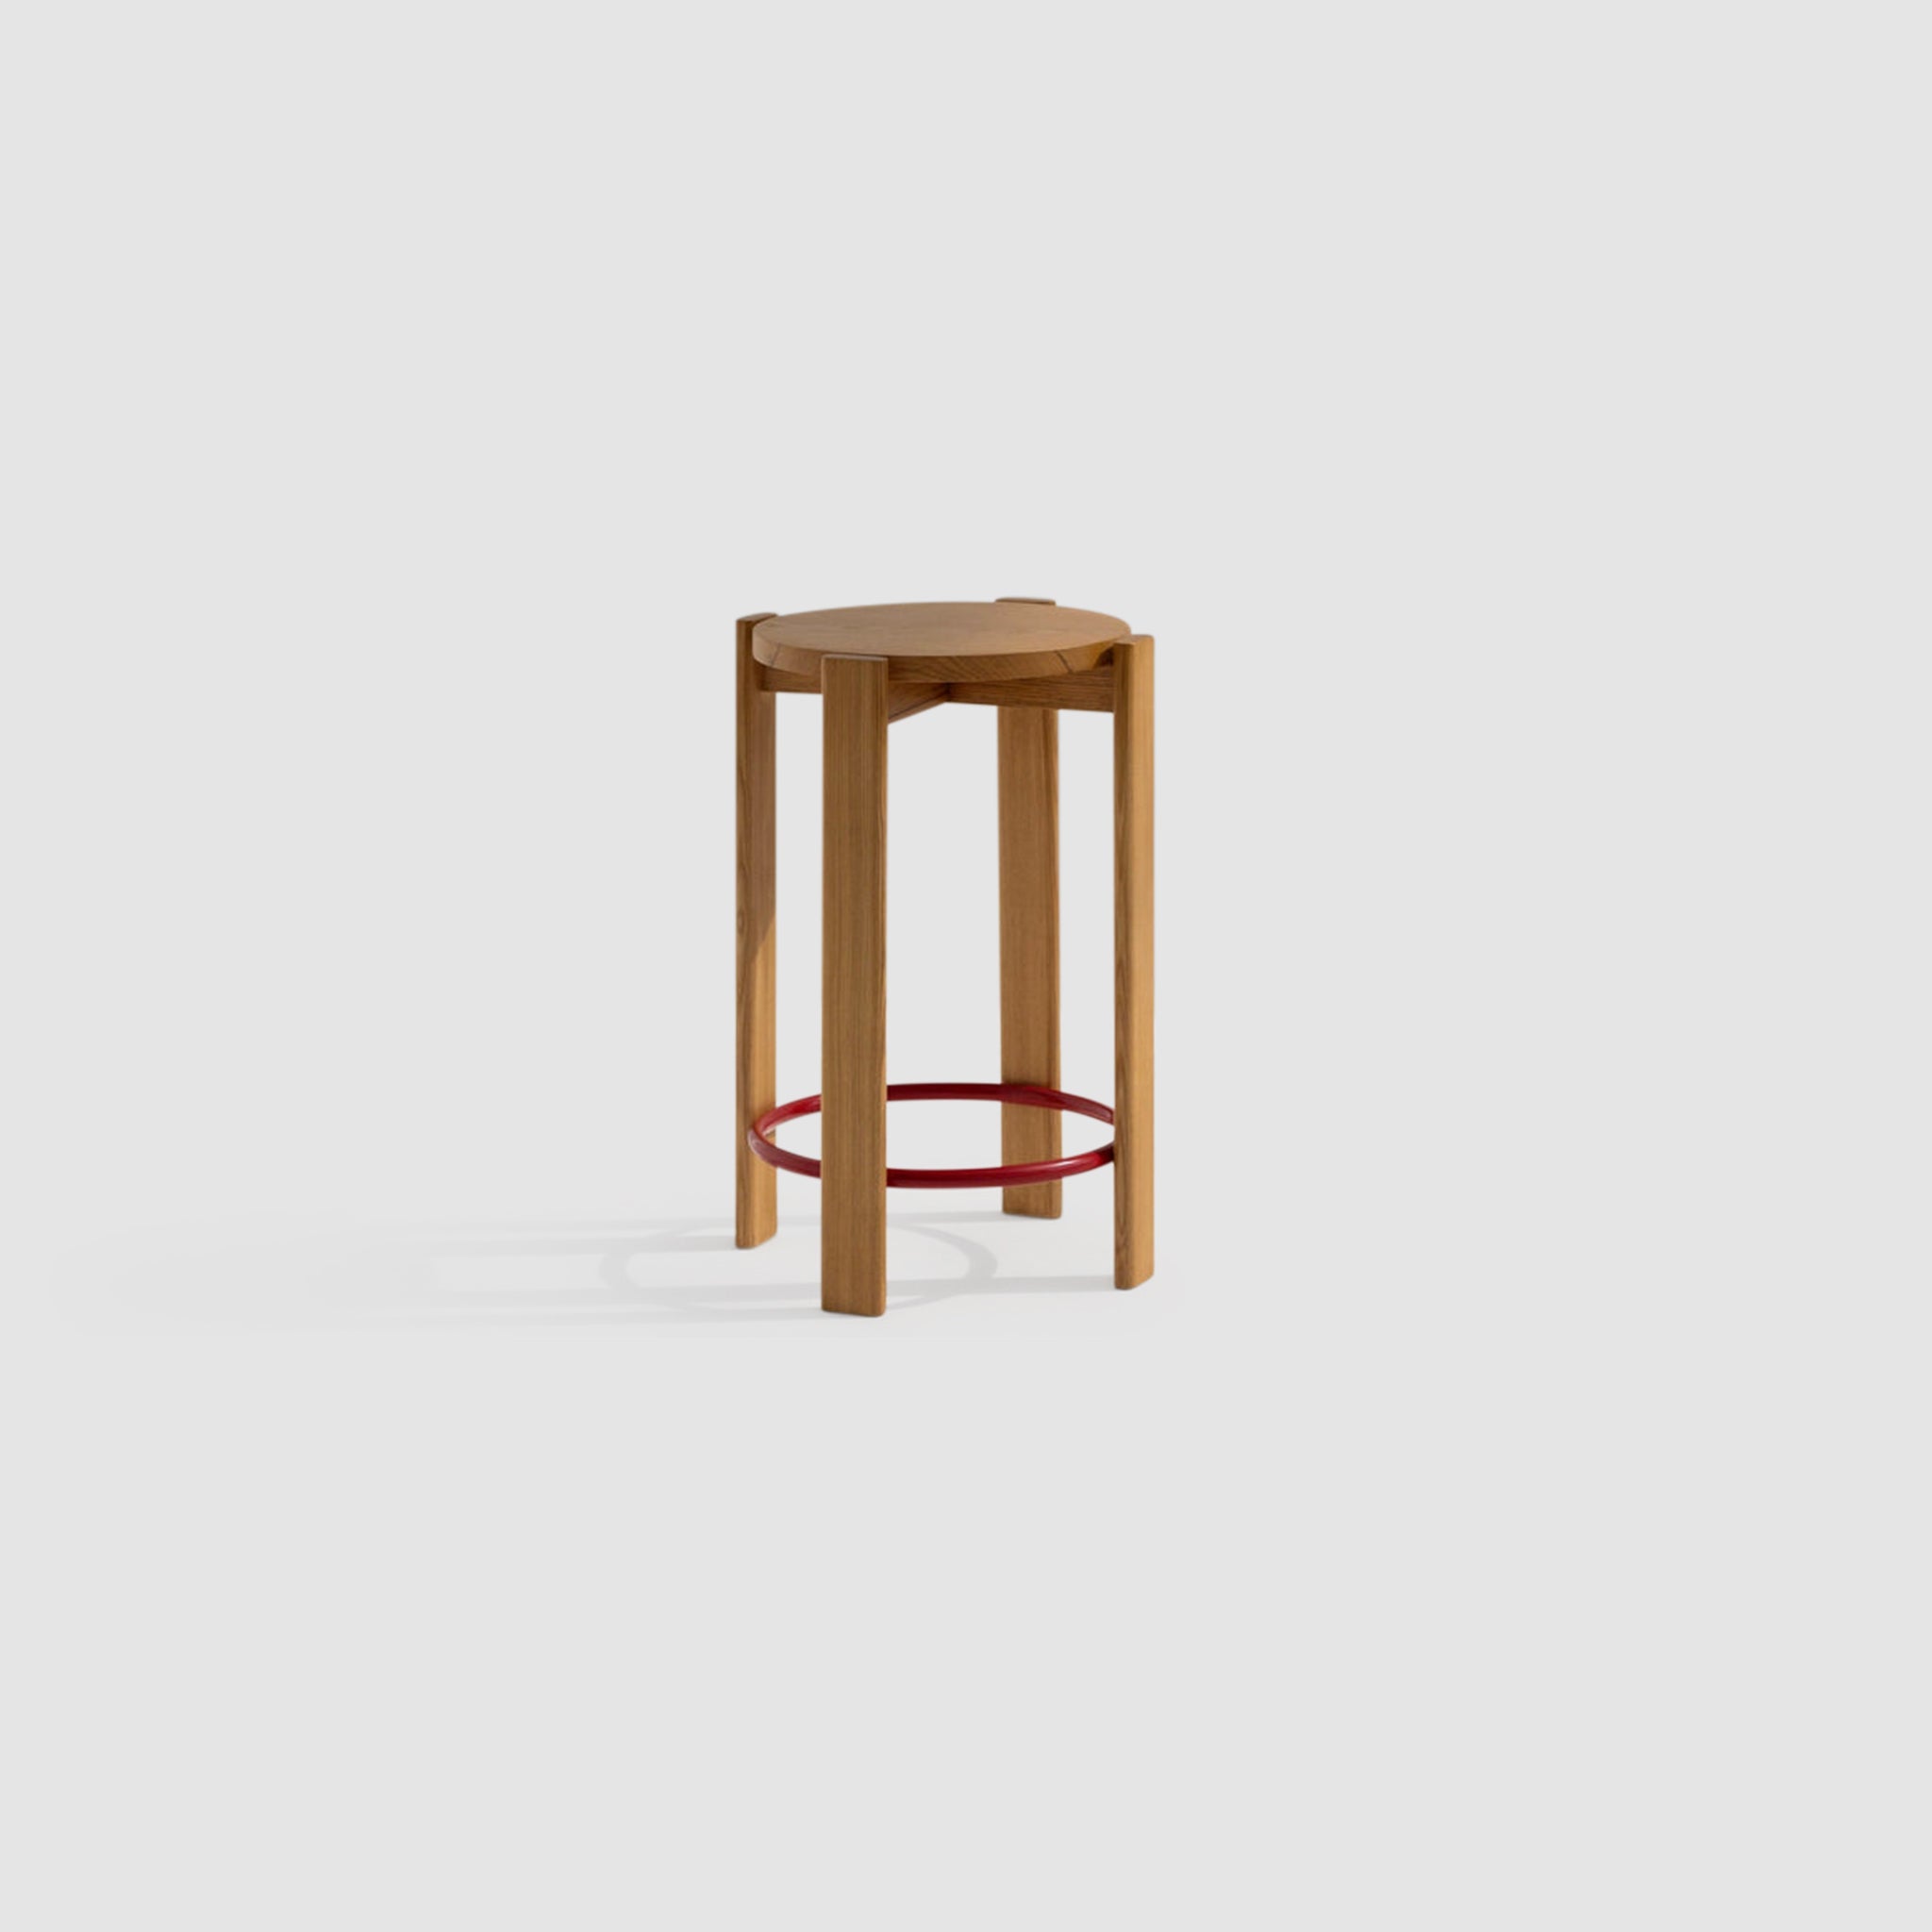 Wooden bar stool with a round seat and a red circular footrest